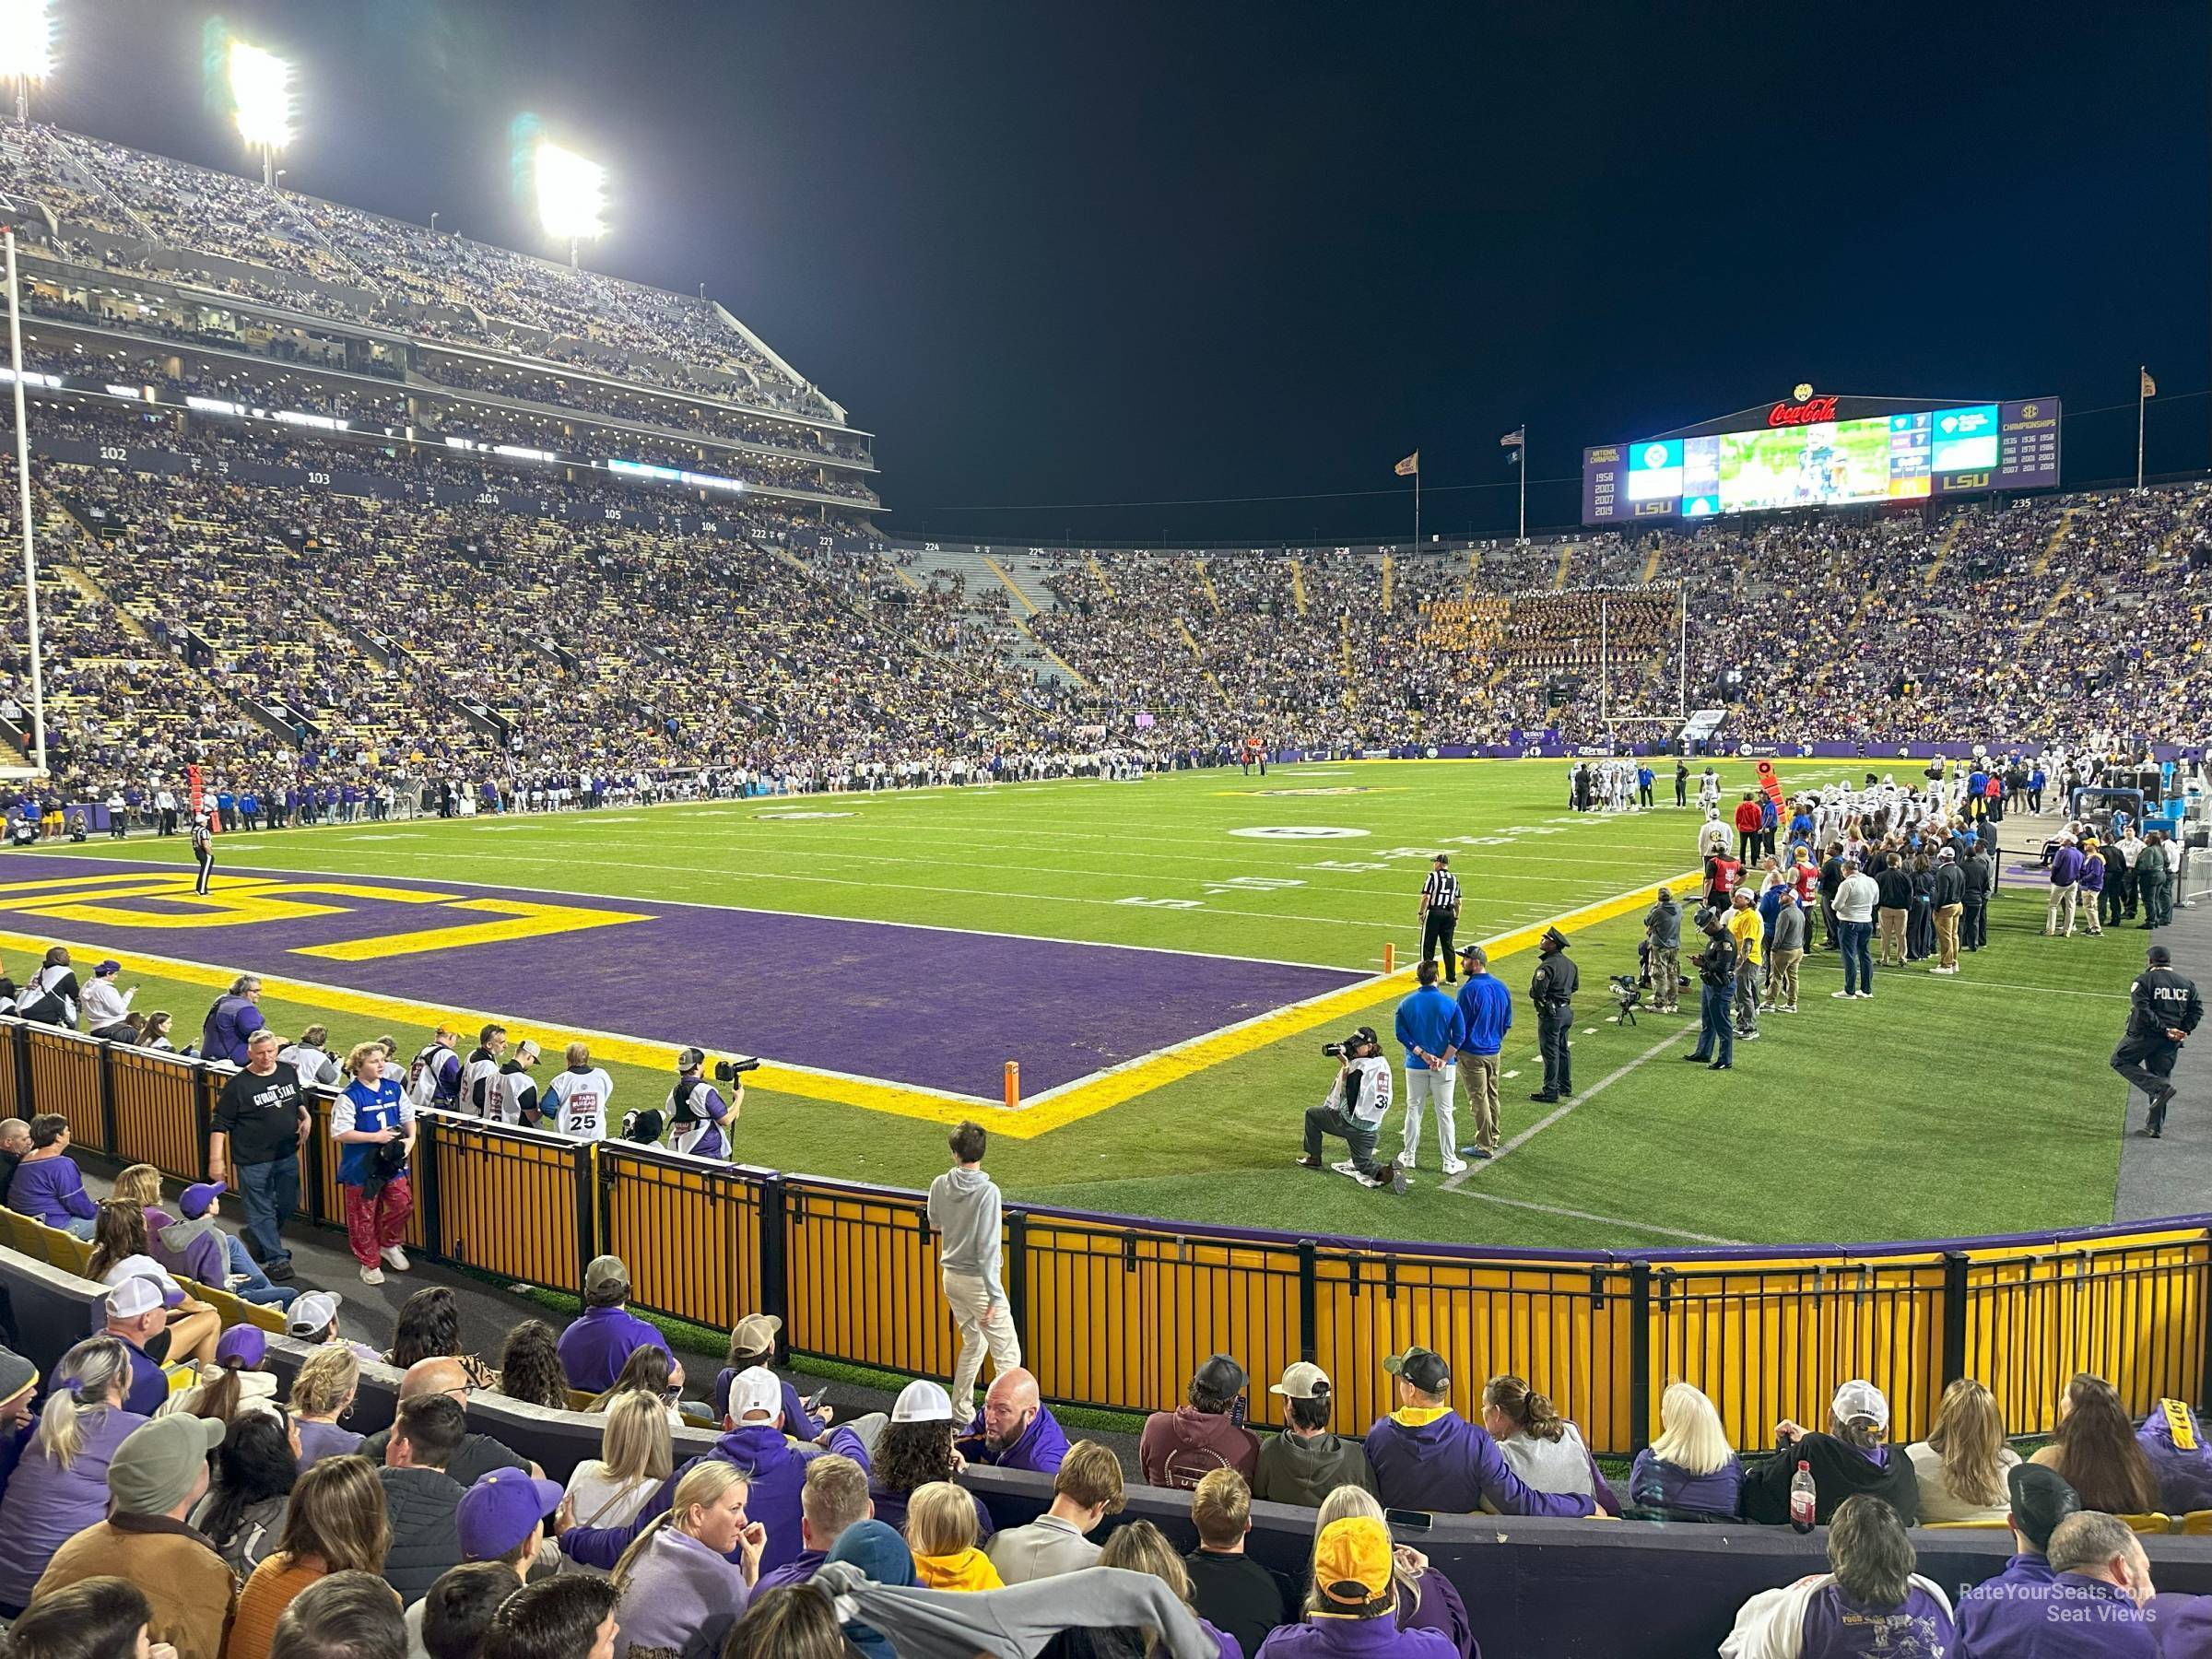 section 403, row 6 seat view  - tiger stadium